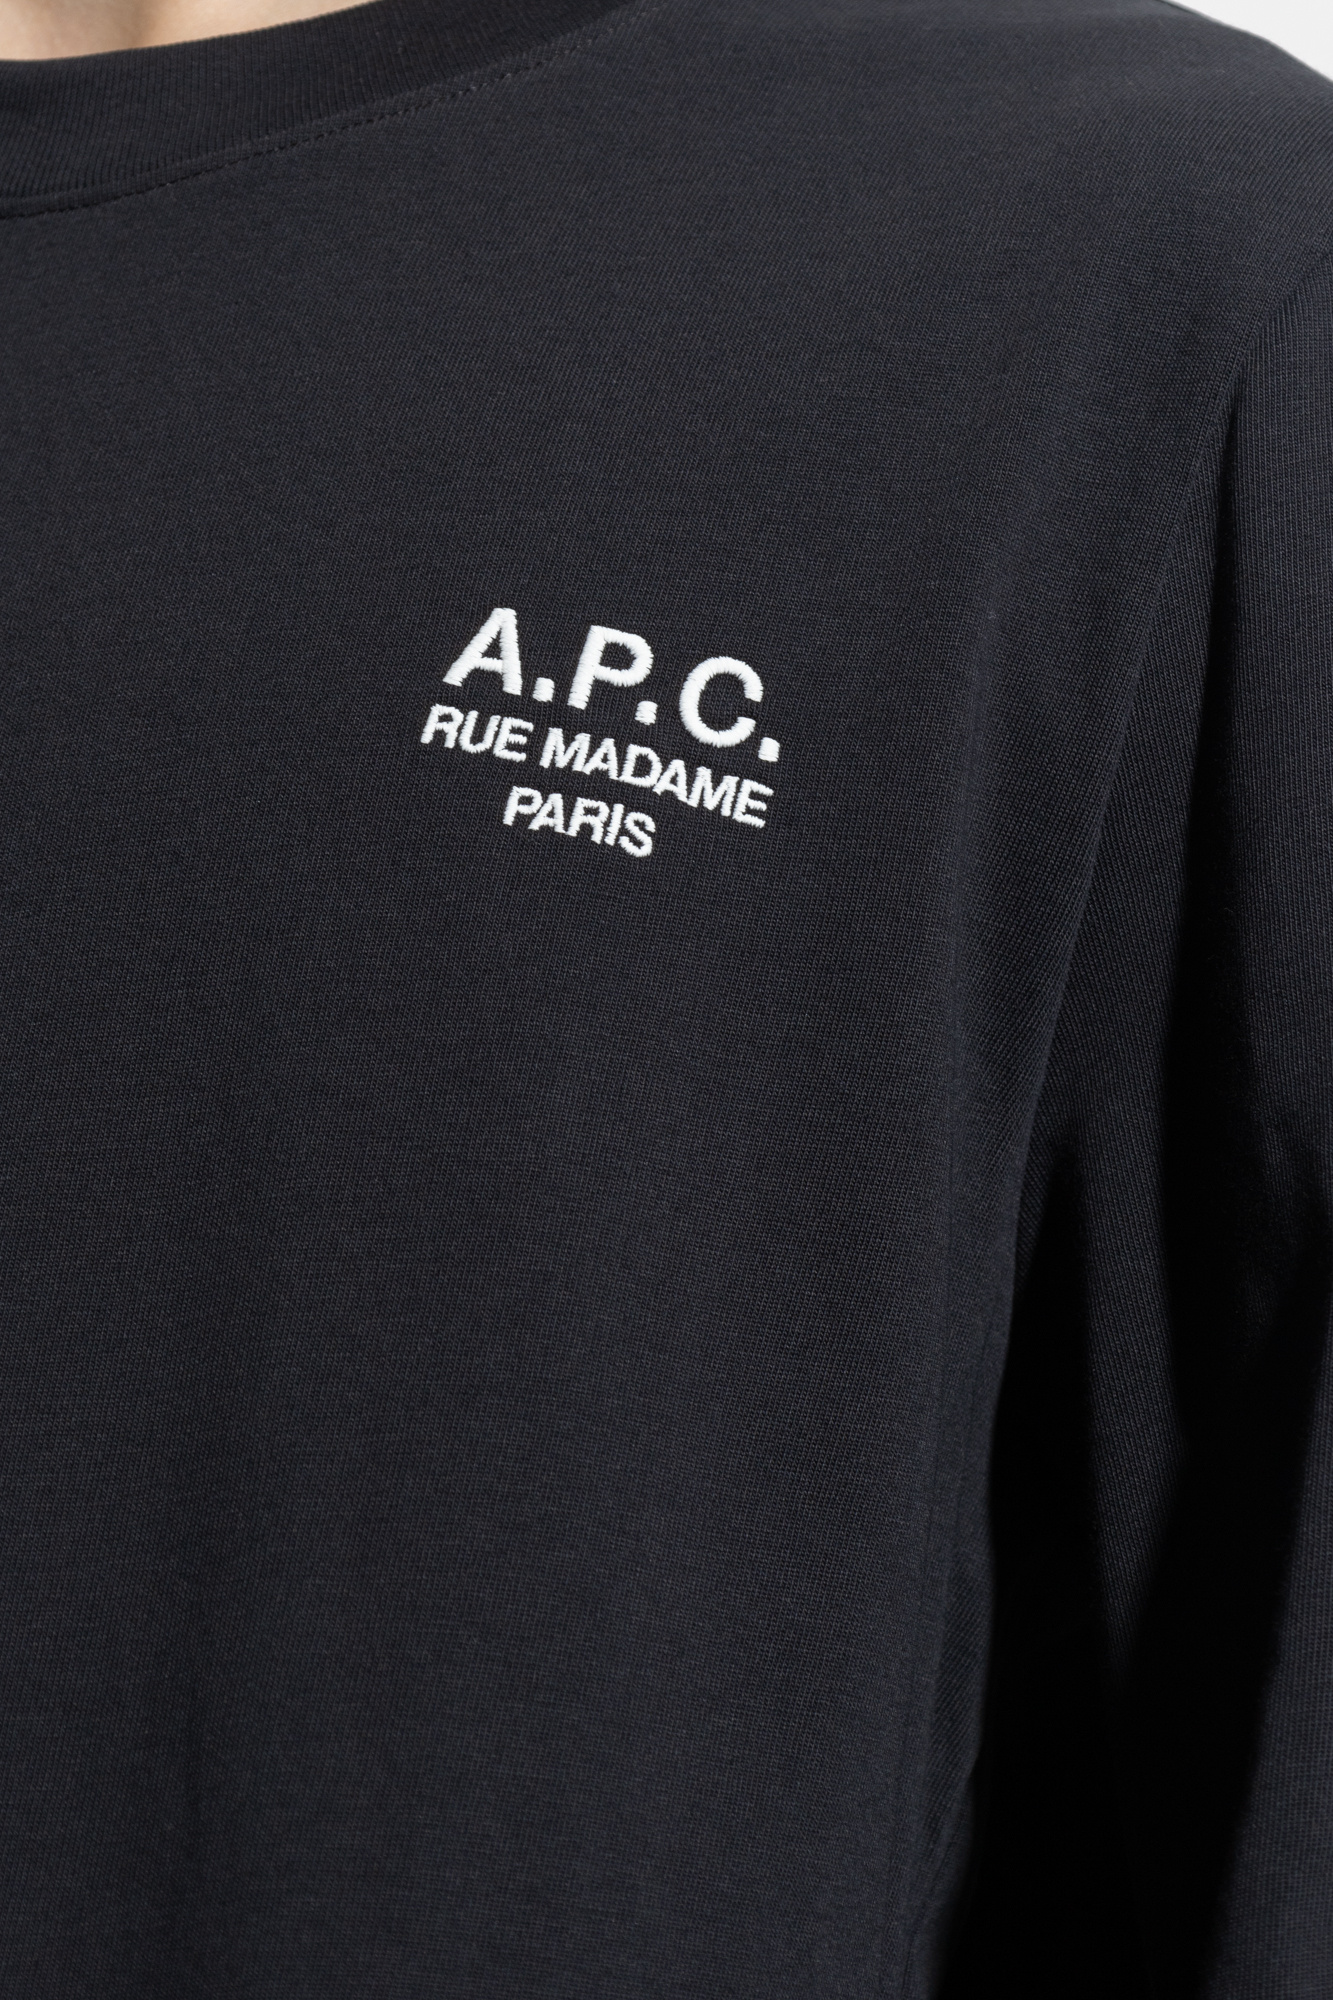 A.P.C. ‘Olivier’ T-shirt with long sleeves